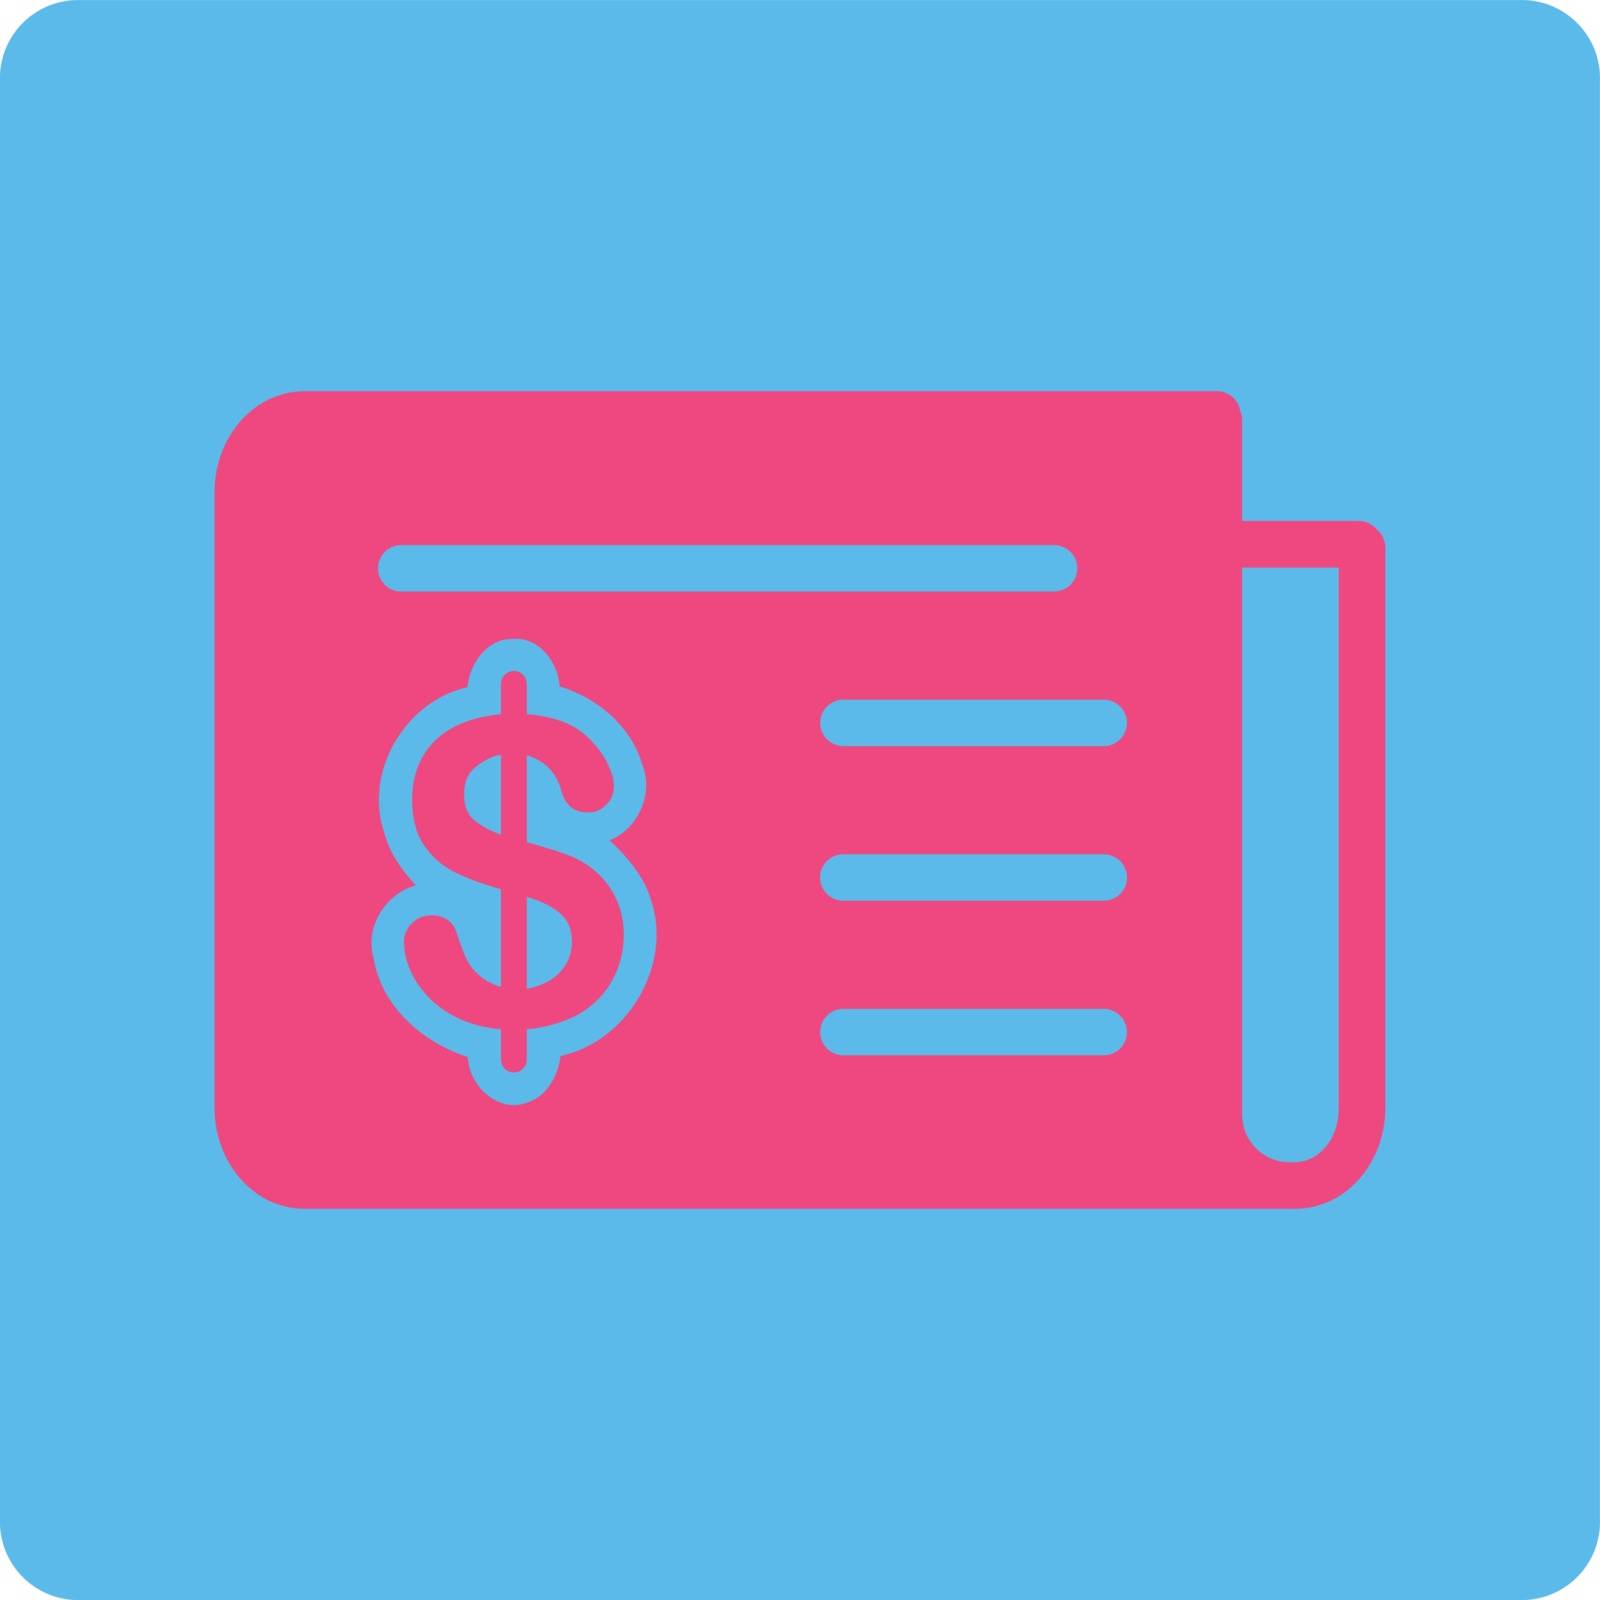 Financial News icon. Vector style is pink and blue colors, flat square rounded button, white background.